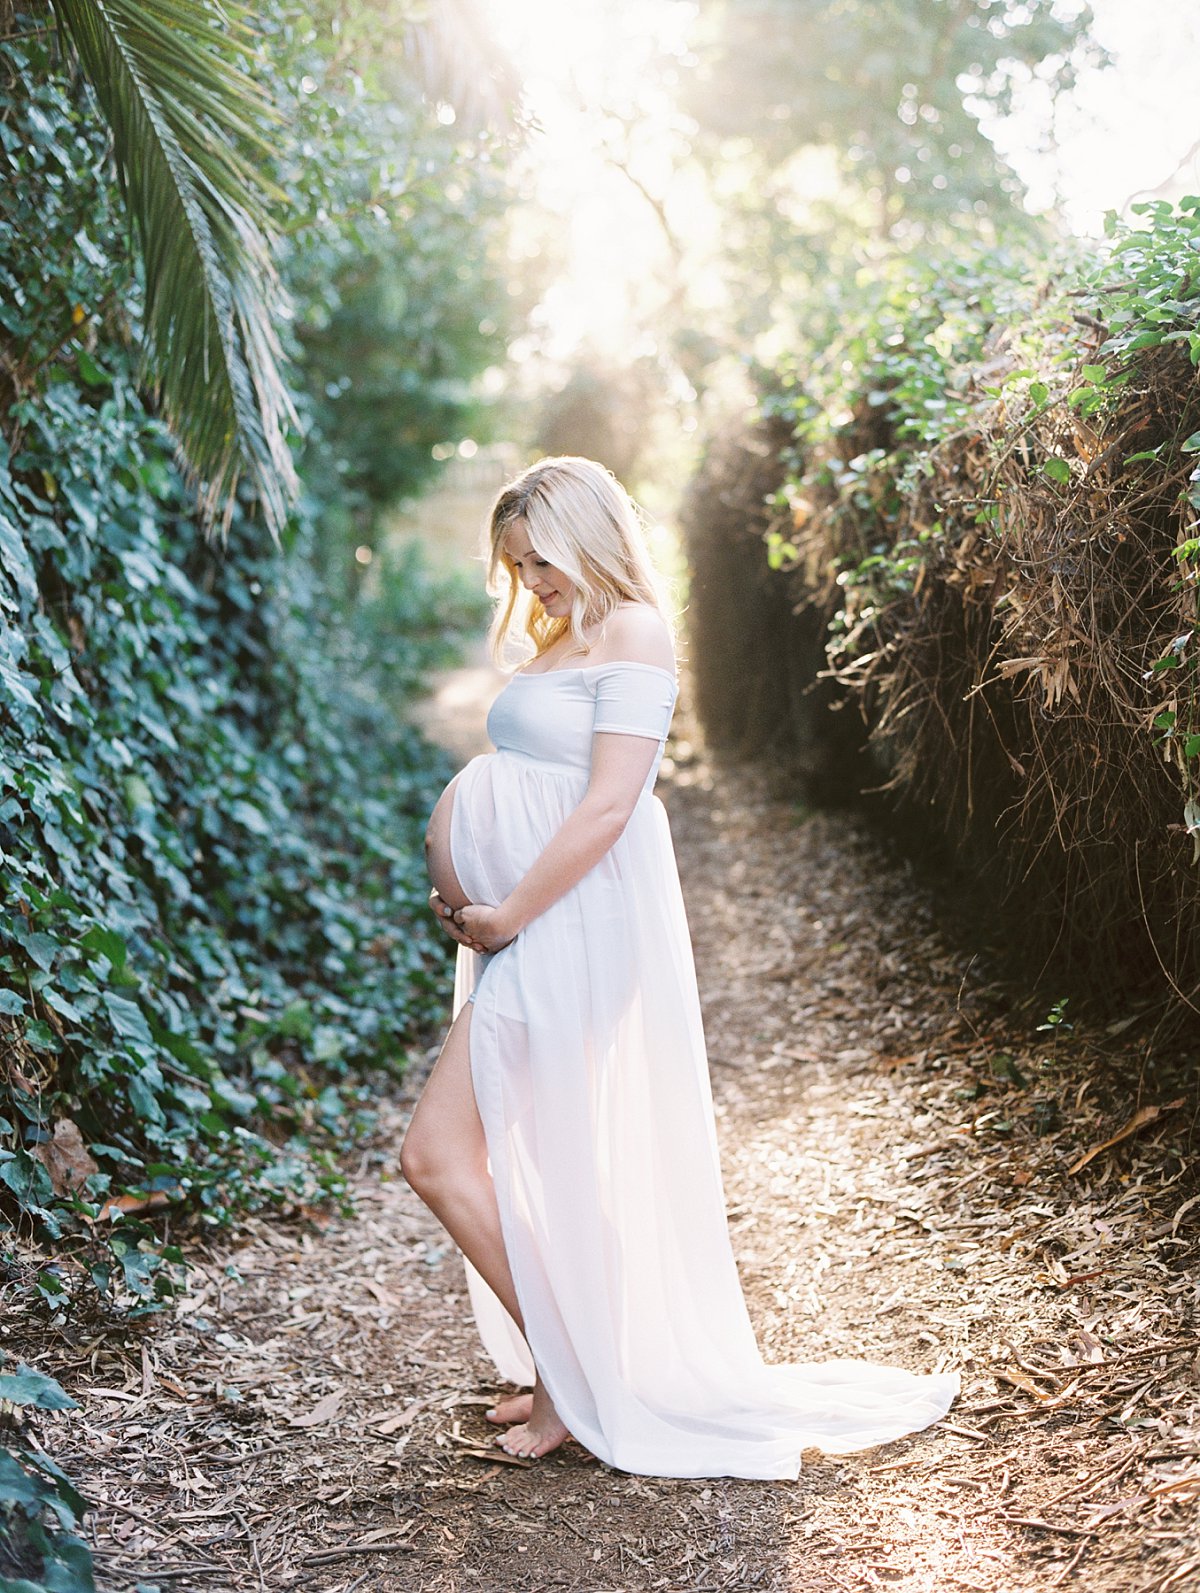 Santa Barbara Maternity Photographer Daniele Rose captures a mother to be in a white dress